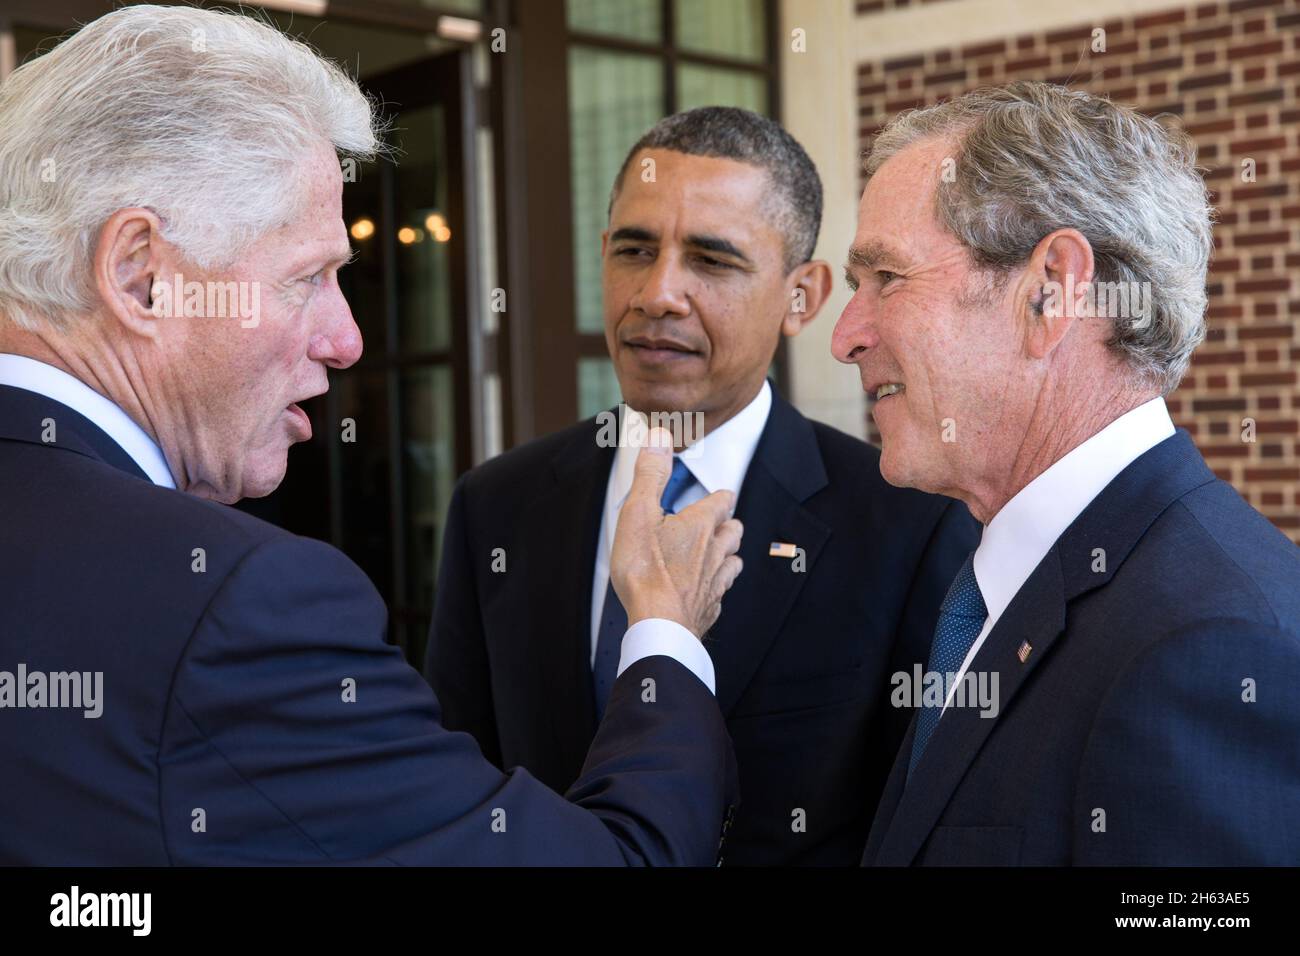 President Barack Obama talks with former Presidents Bill Clinton and George W. Bush before a luncheon at the George W. Bush Presidential Library and Museum on the campus of Southern Methodist University in Dallas, Texas, April 25, 2013. Stock Photo